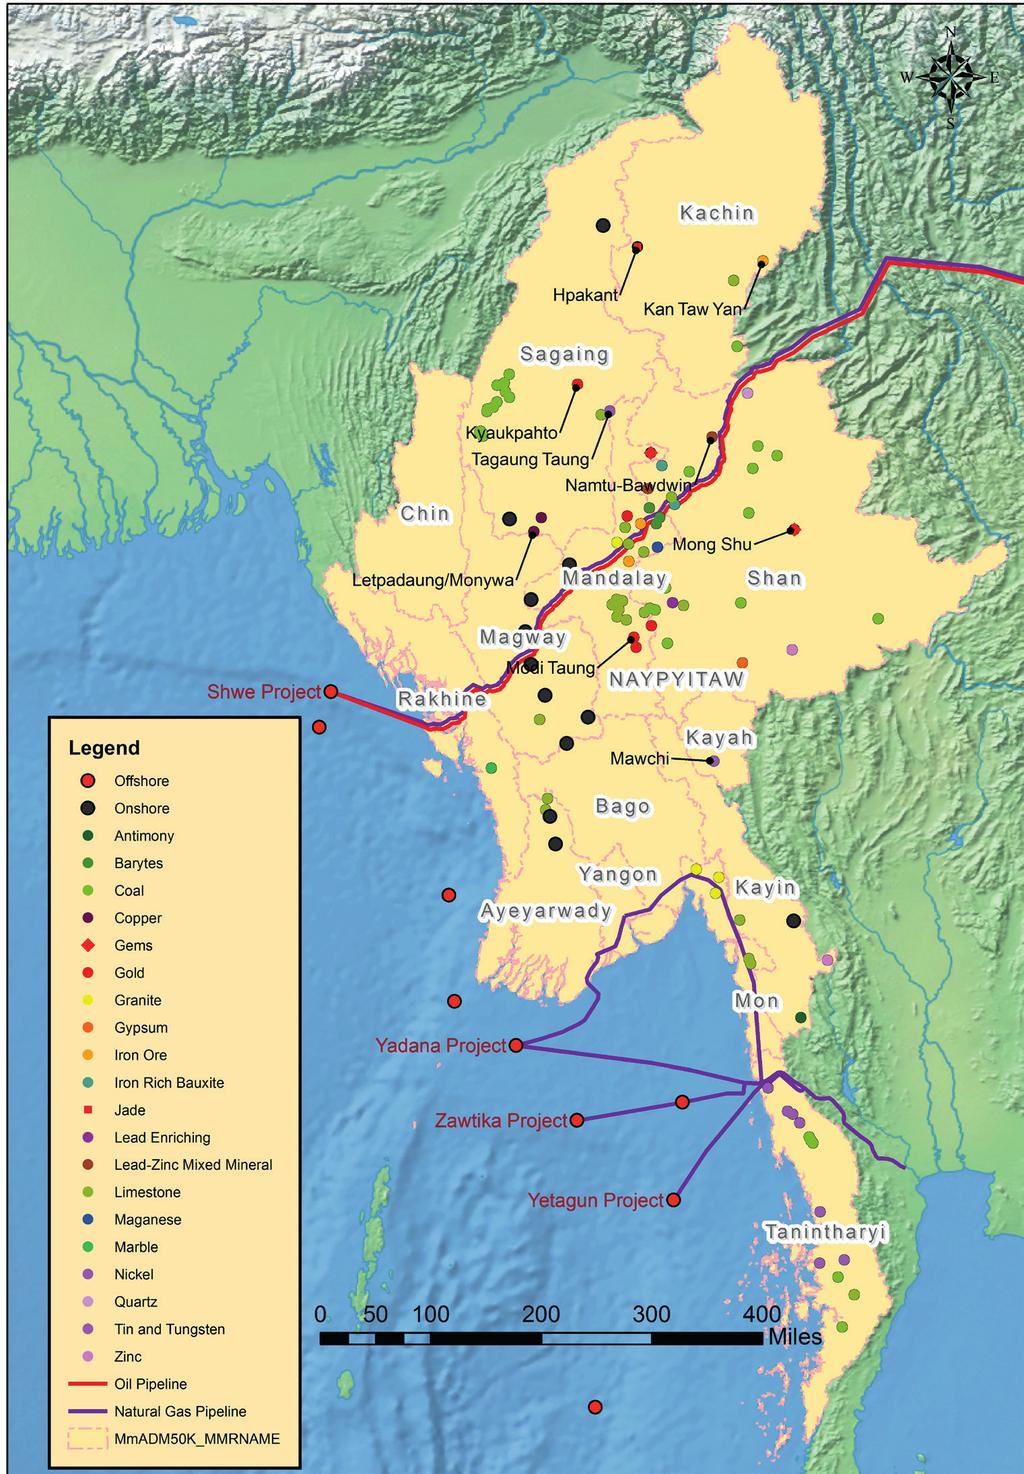 Country Strategy Note: Myanmar Mining has also regularly surfaced at the center of controversy.